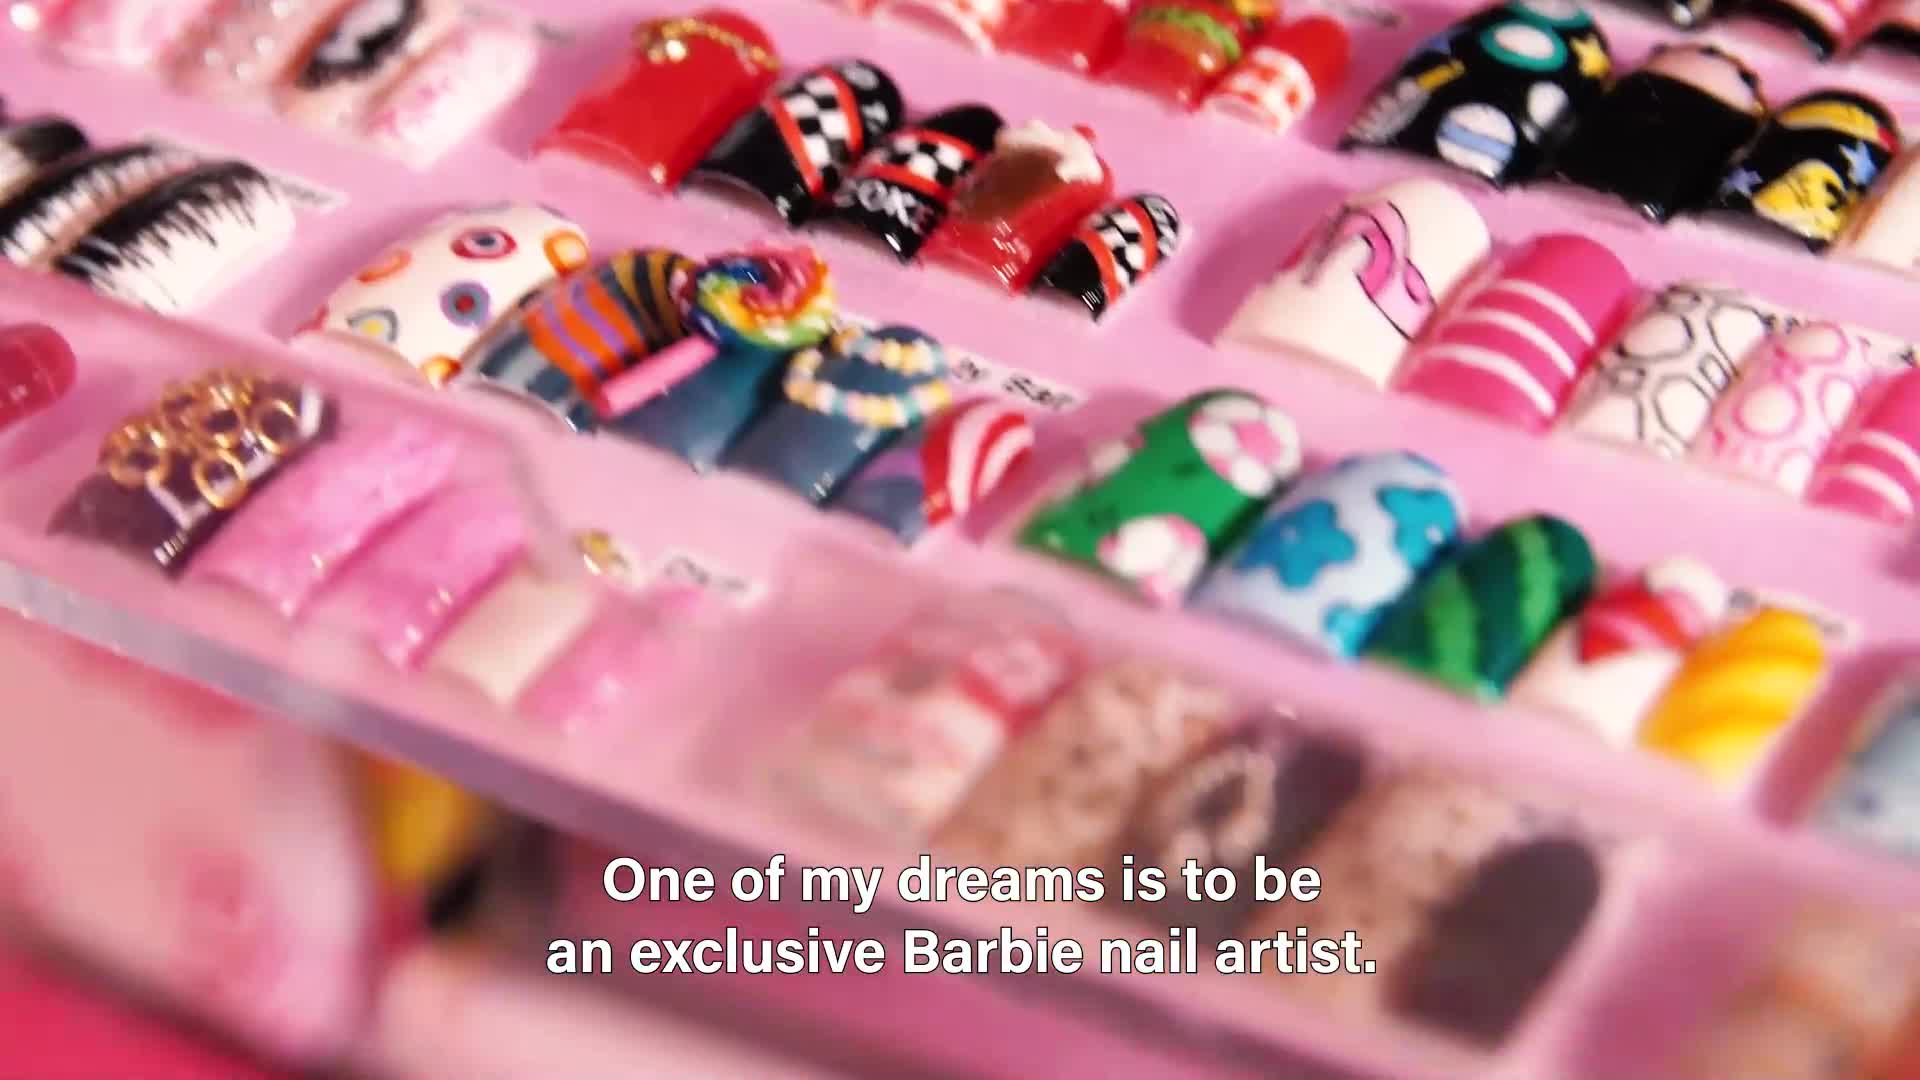 The most iconic $80,000 Barbie collection